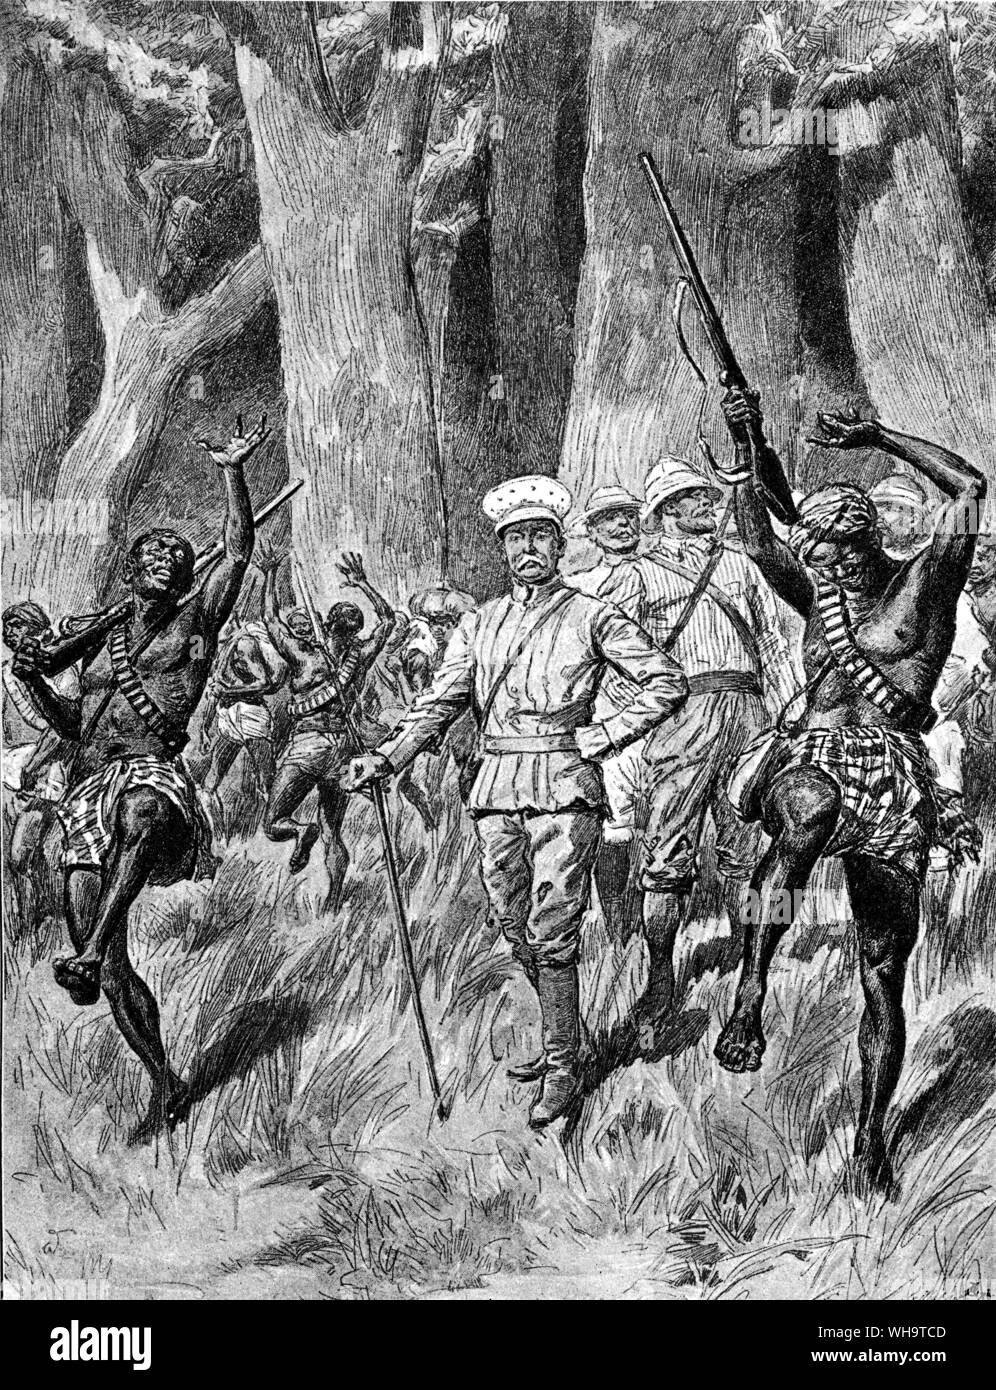 A European expedition emerges from a forest in Africa. 'Daylight at last! The advance column of the Emin Pasha relief expedition emerging from the Great Forest.' Stock Photo